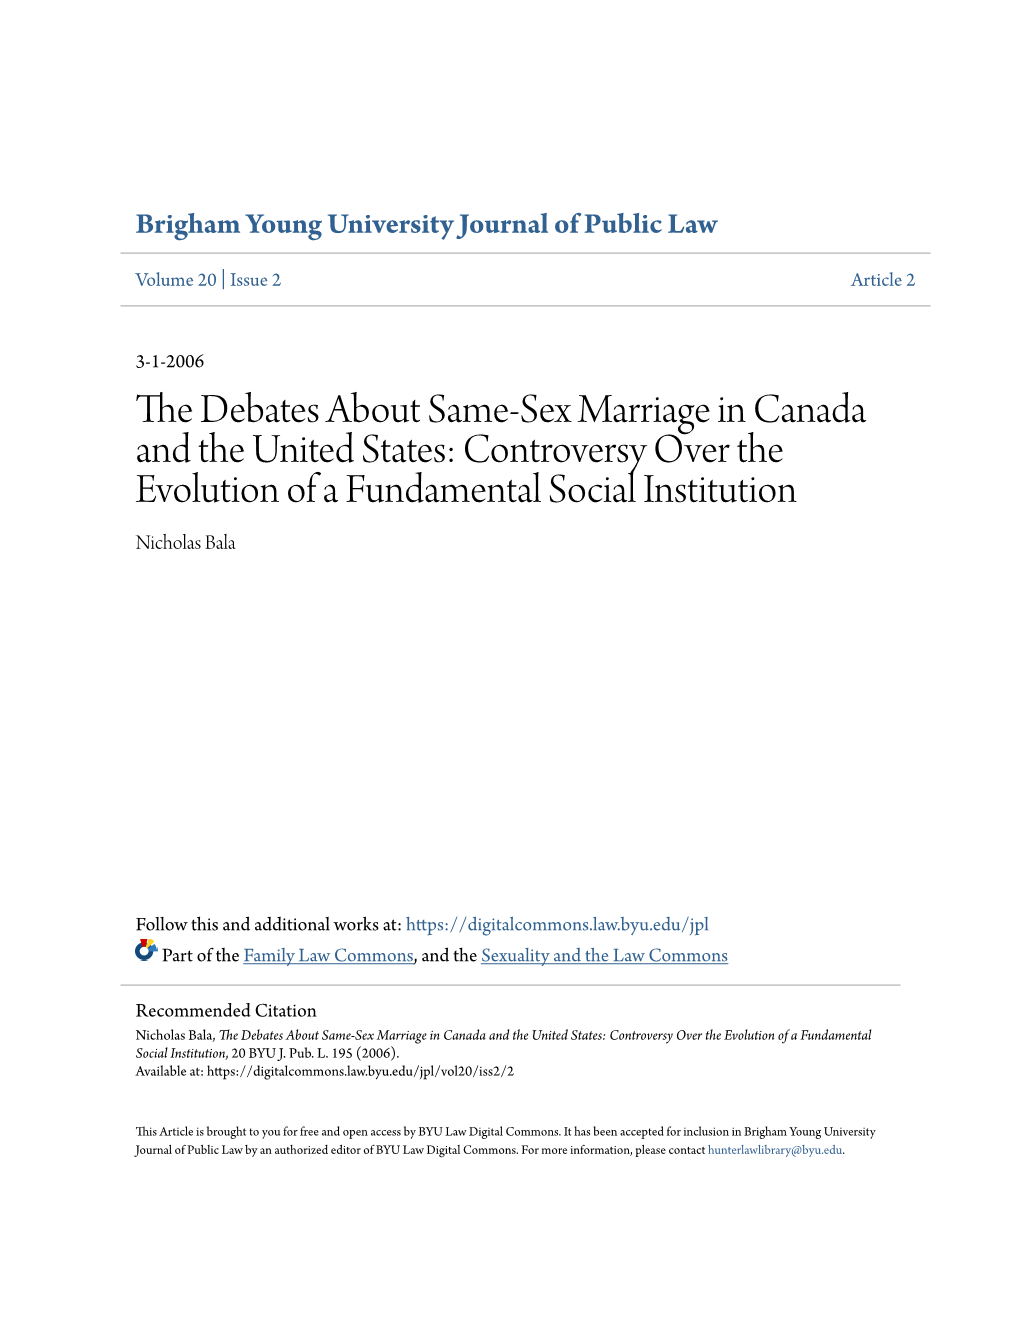 The Debates About Same-Sex Marriage in Canada and the United States: Controversy Over the Evolution of a Fundamental Social Institution, 20 BYU J